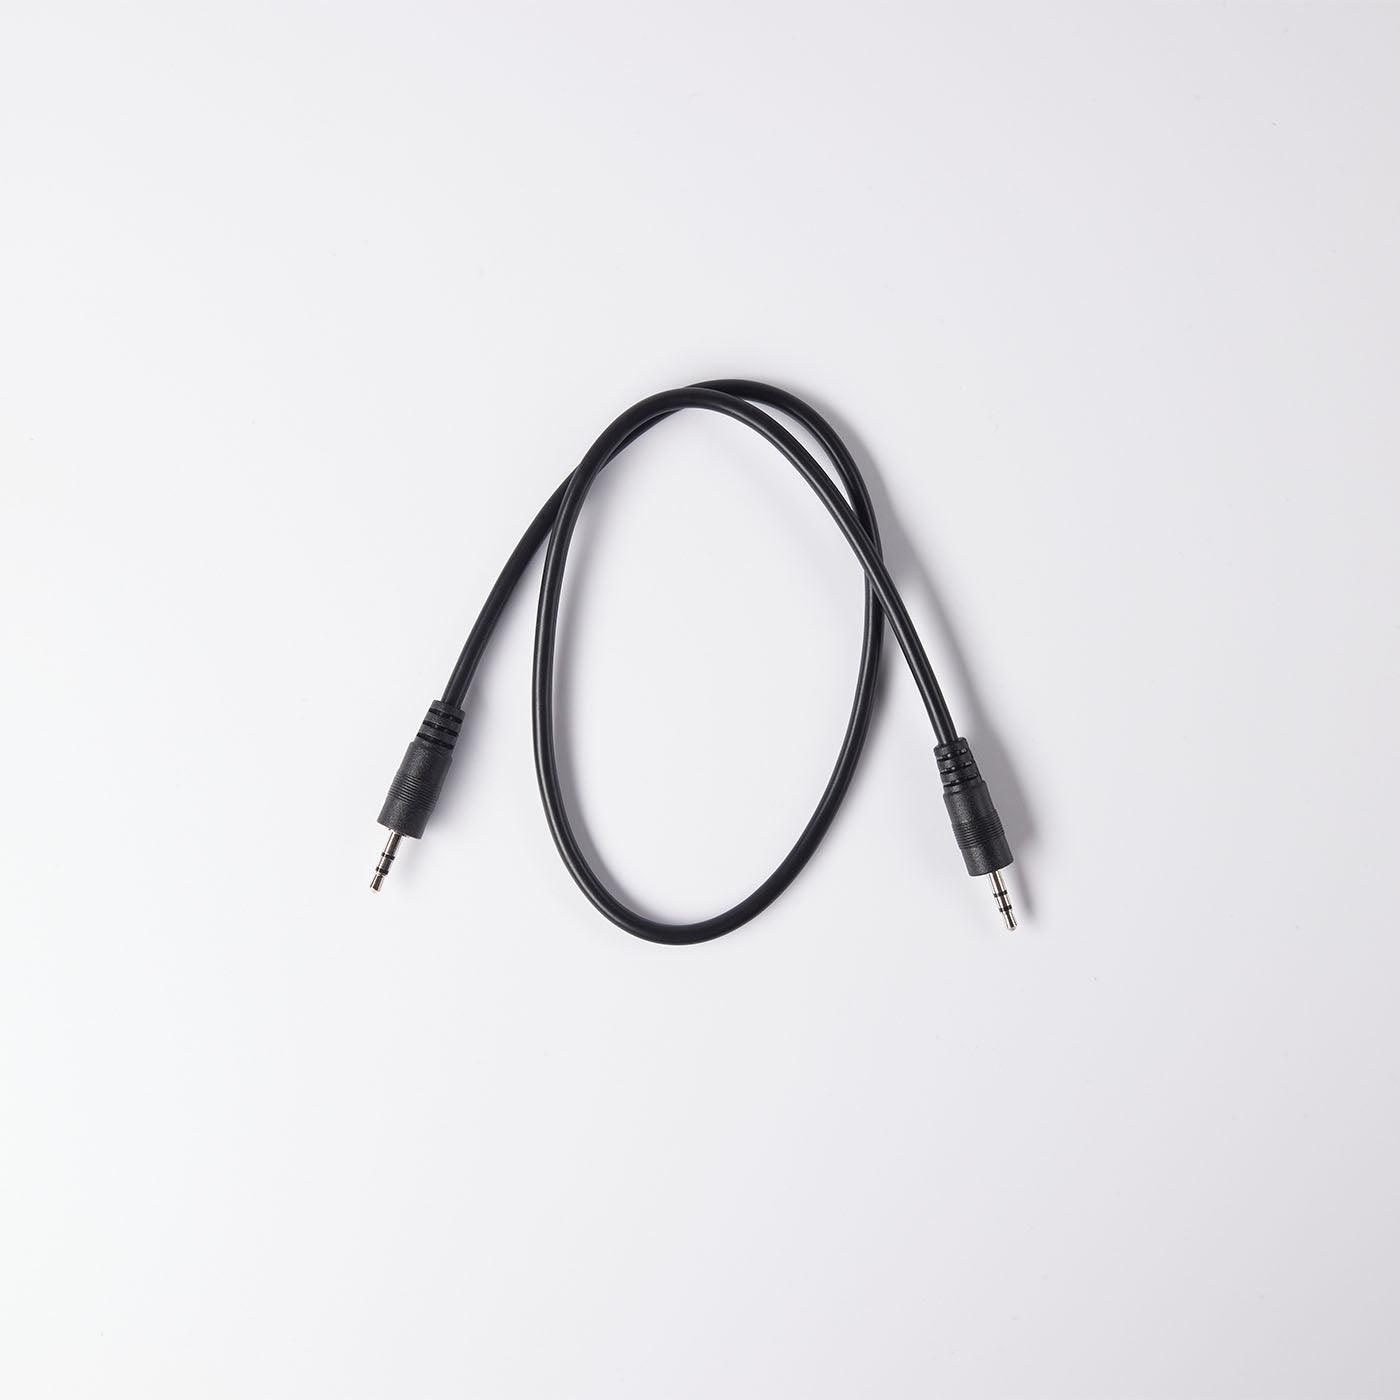 2.5mm TRS cable